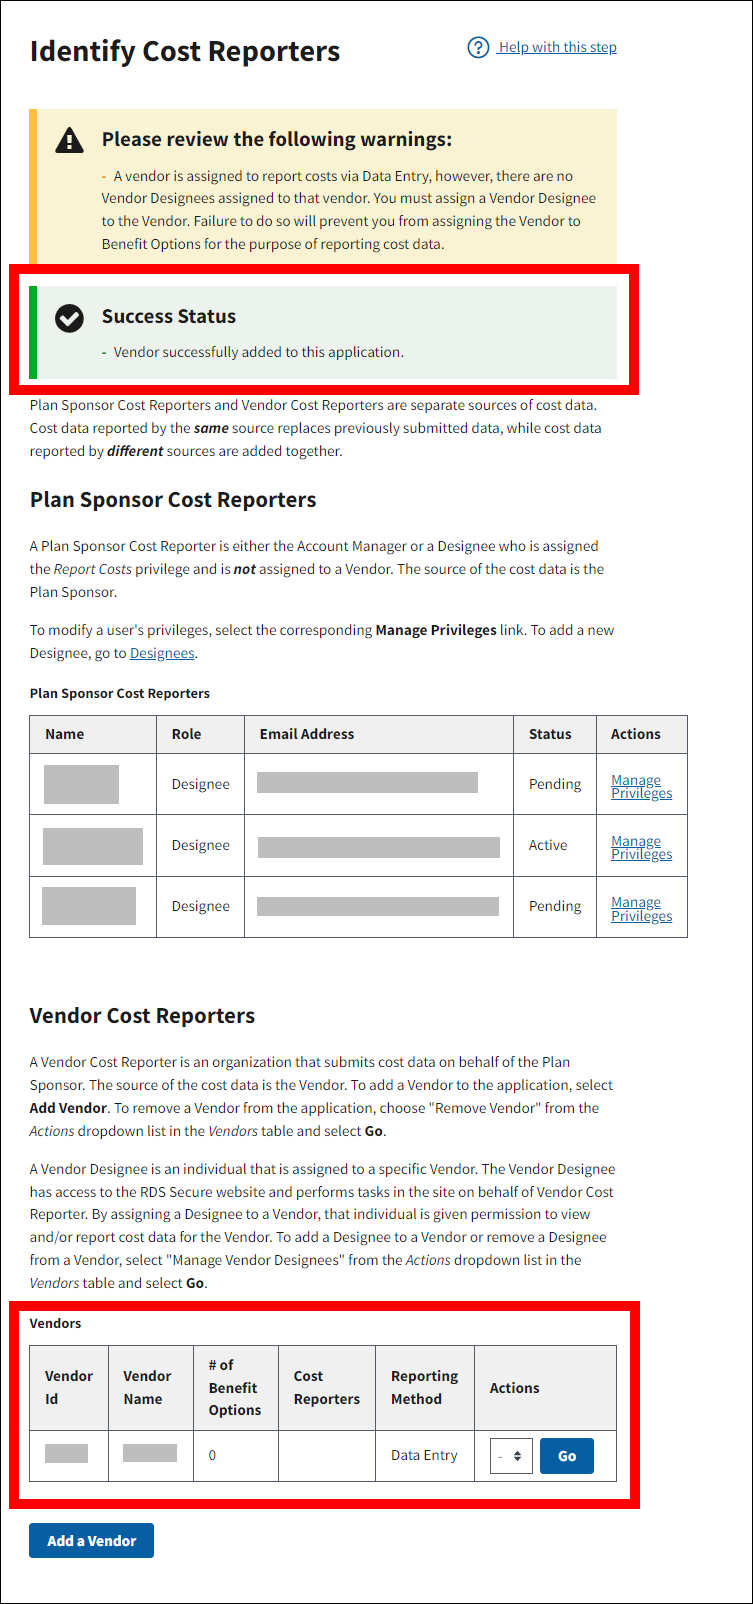 Identify Cost Reporters page with sample data. Success message and Vendors table are highlighted.